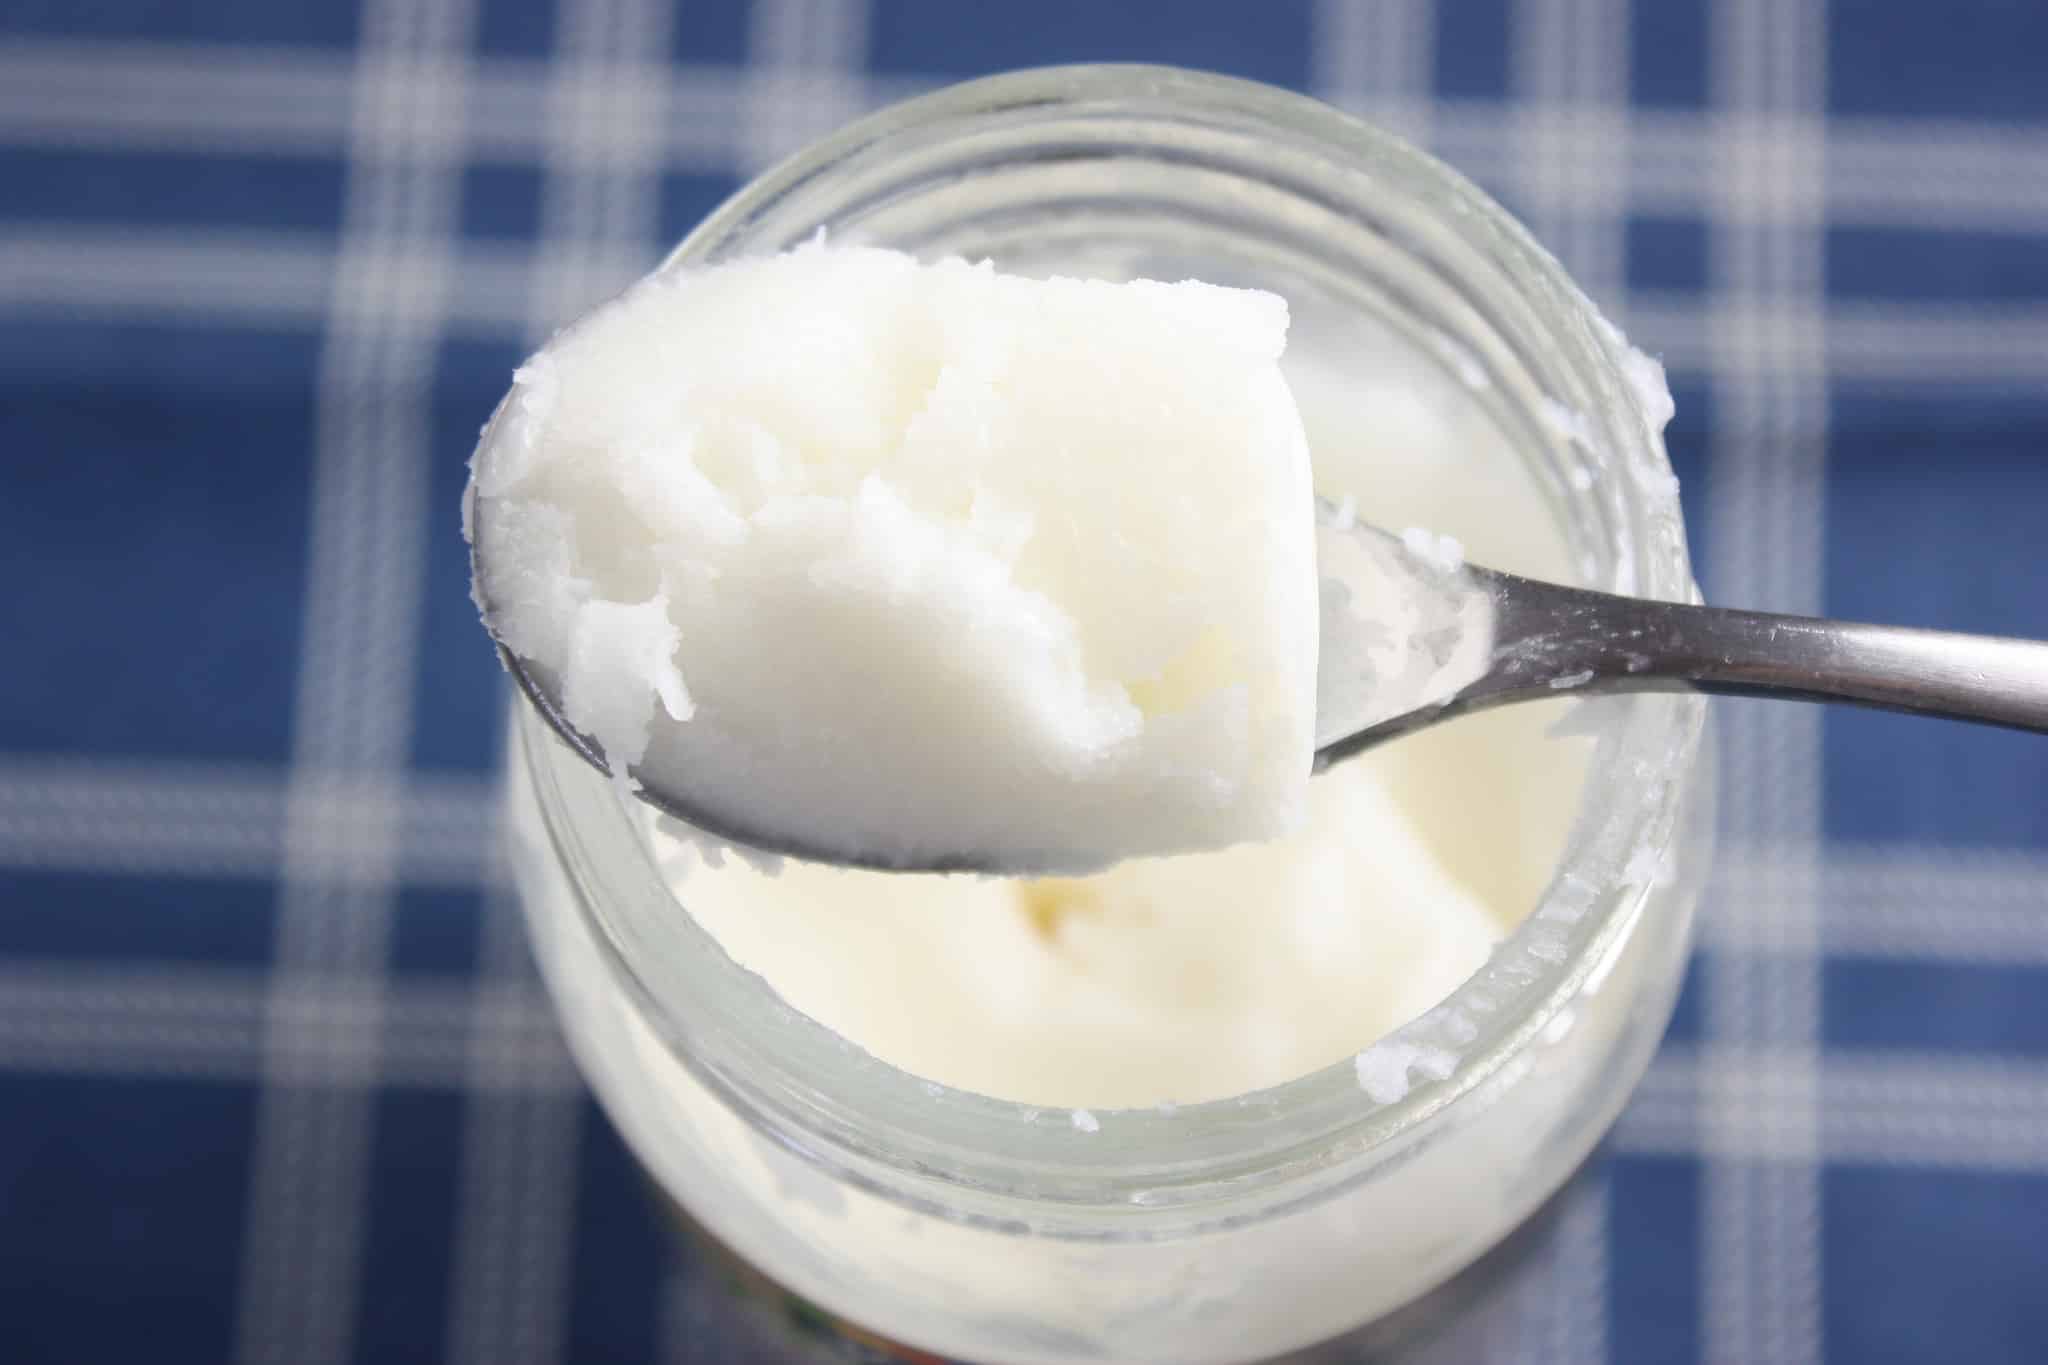 Whats the latest verdict on the proclaimed health benefits of coconut oil?